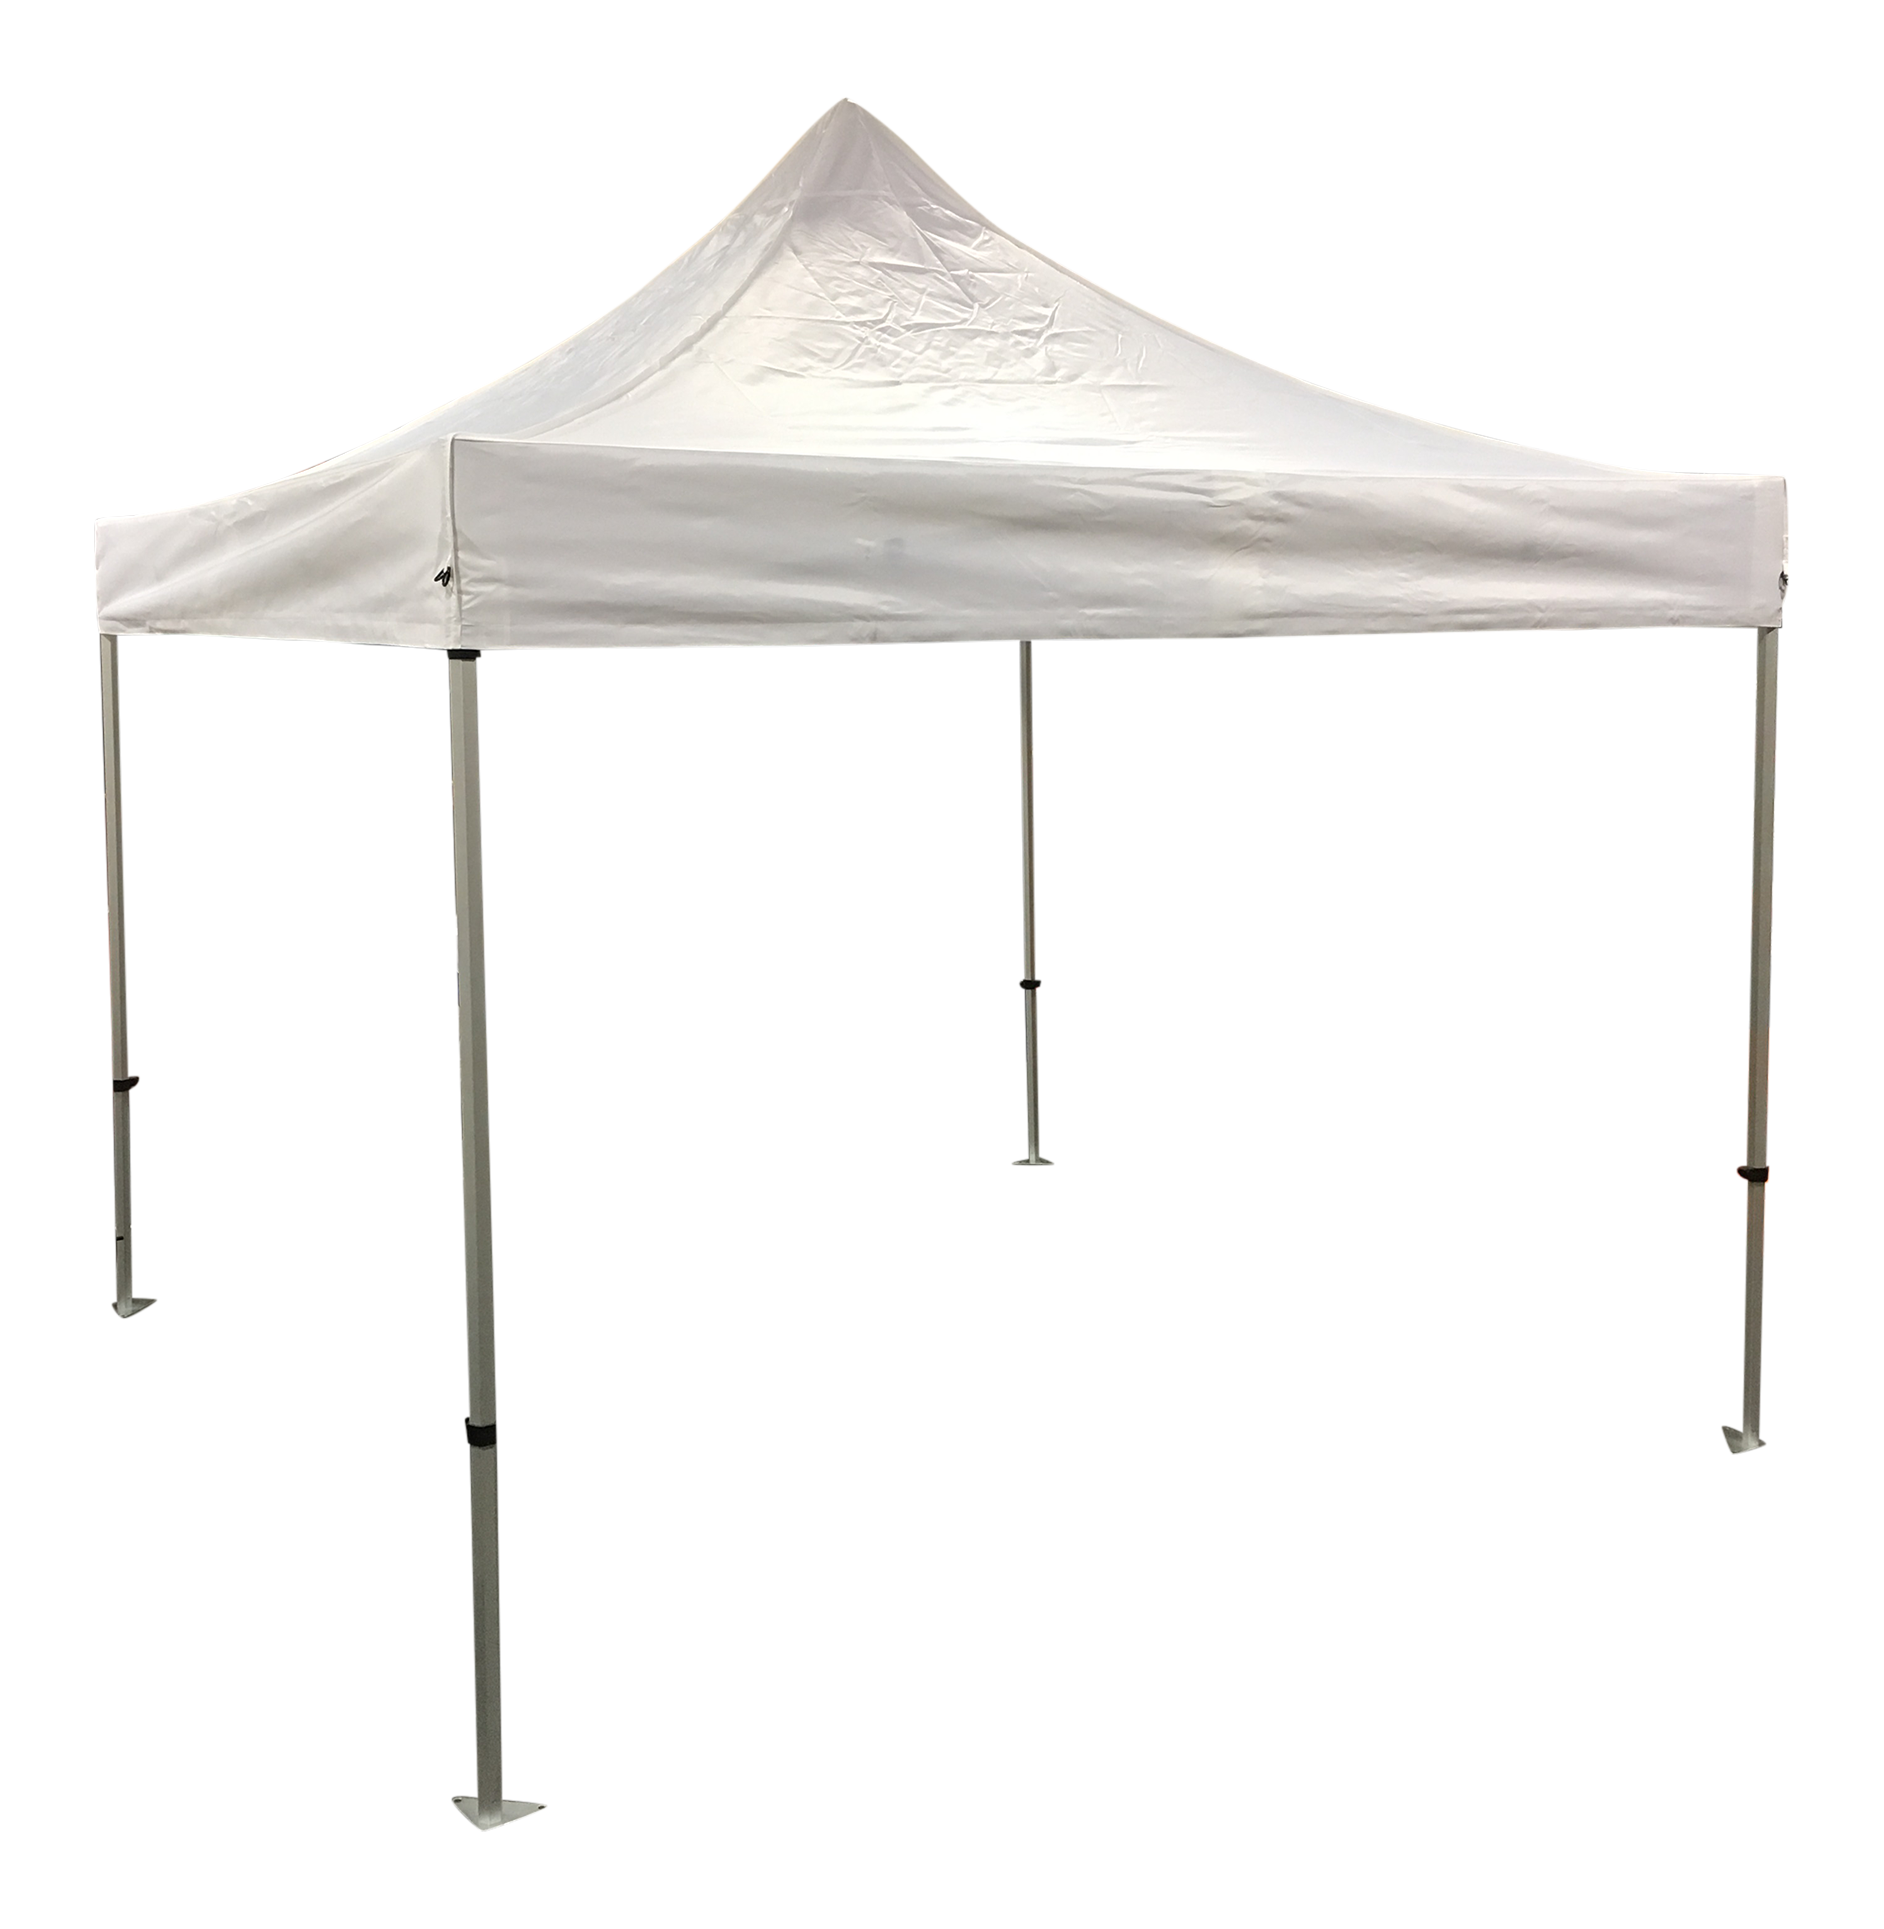 Clipart tent tailgate tent. Climbing white canopy tents